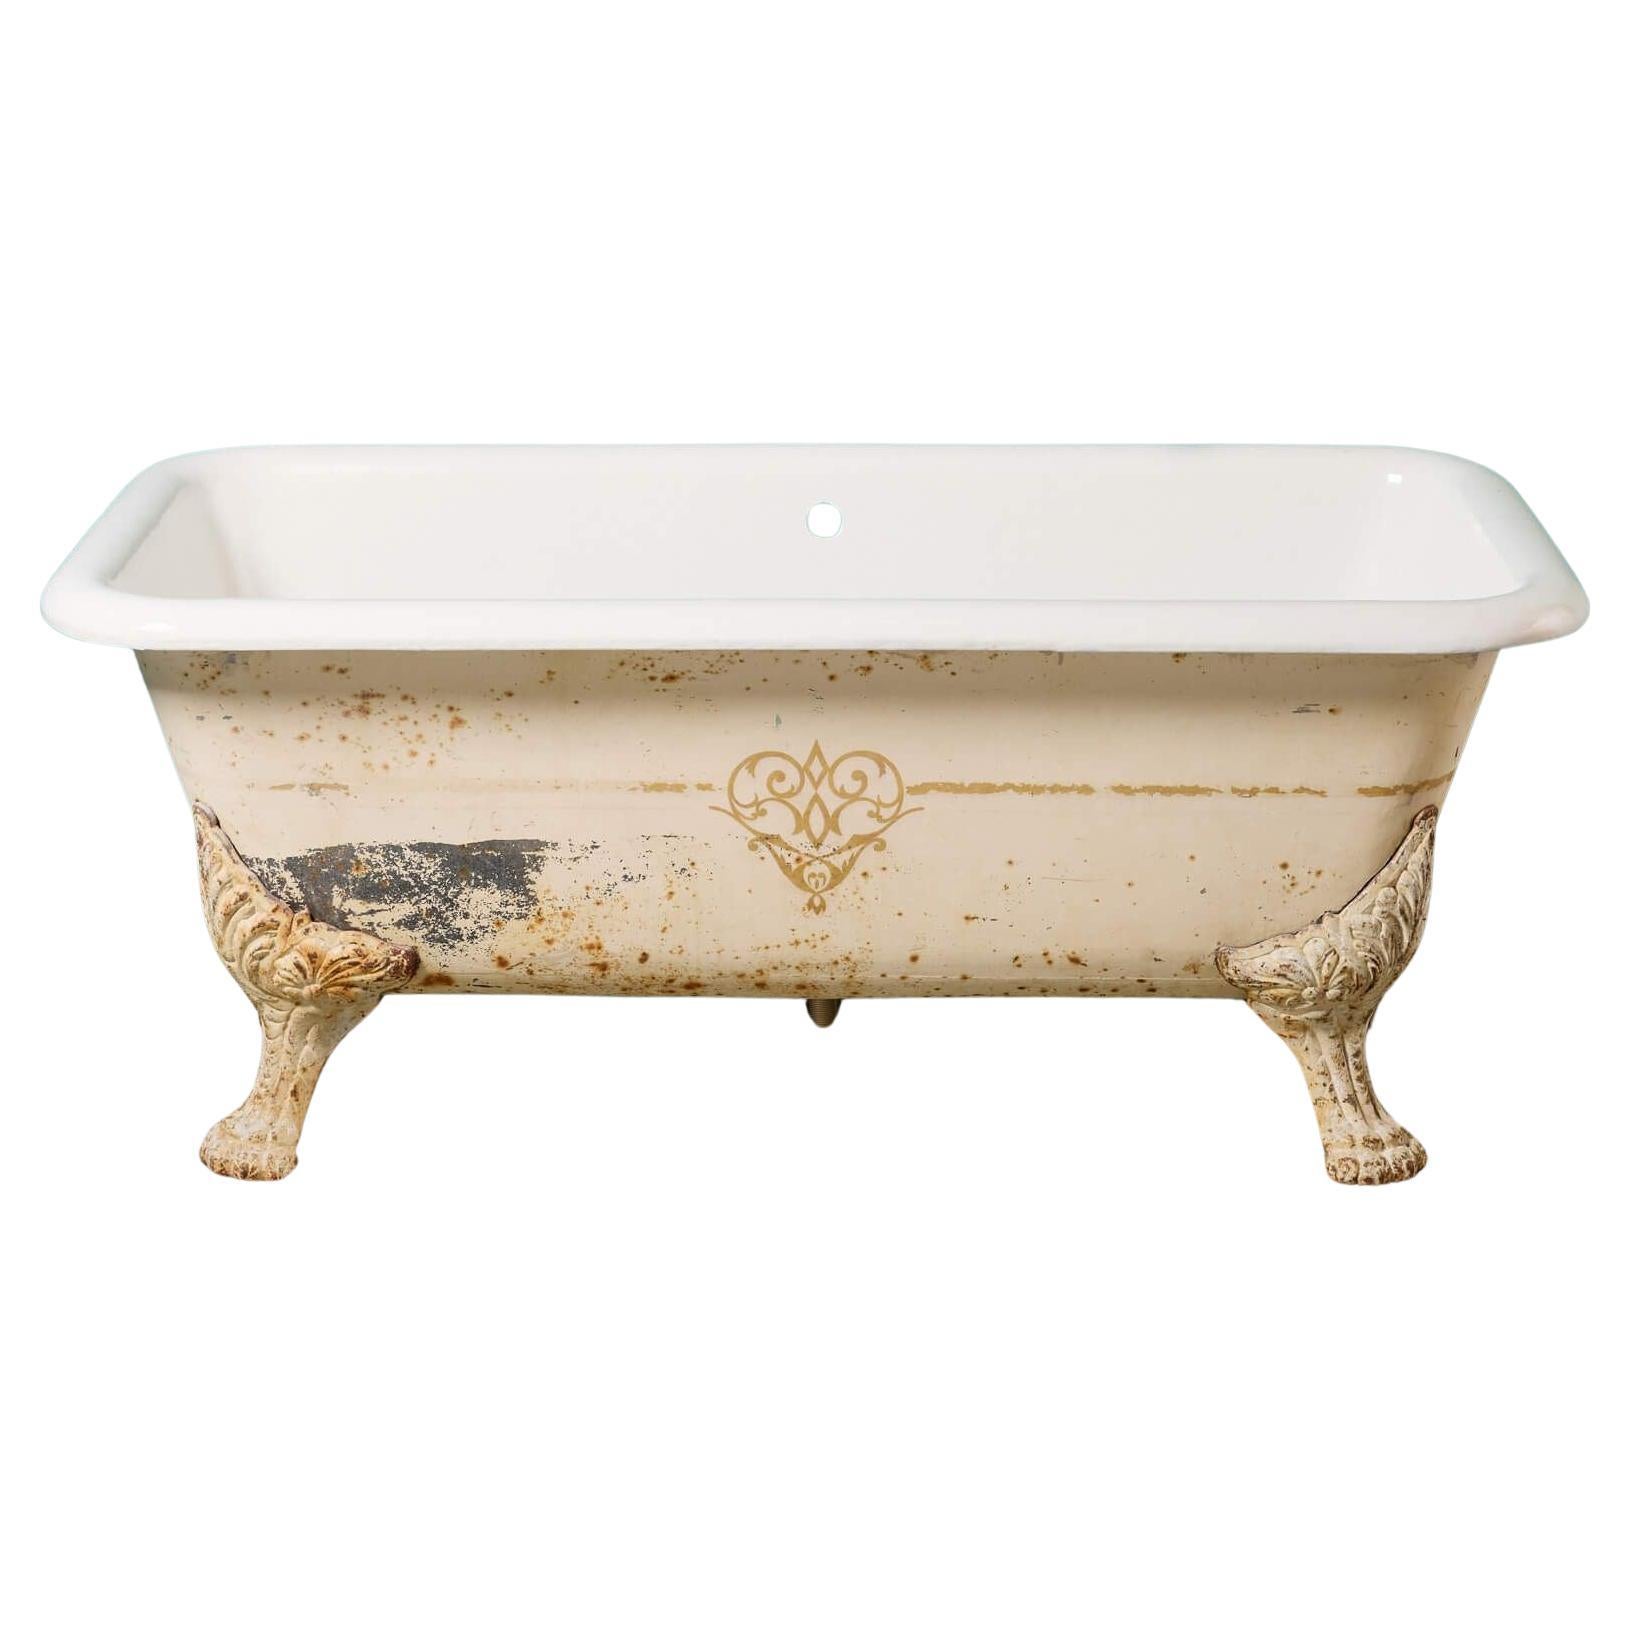 Antique Double Ended Bathtub with Claw Feet For Sale